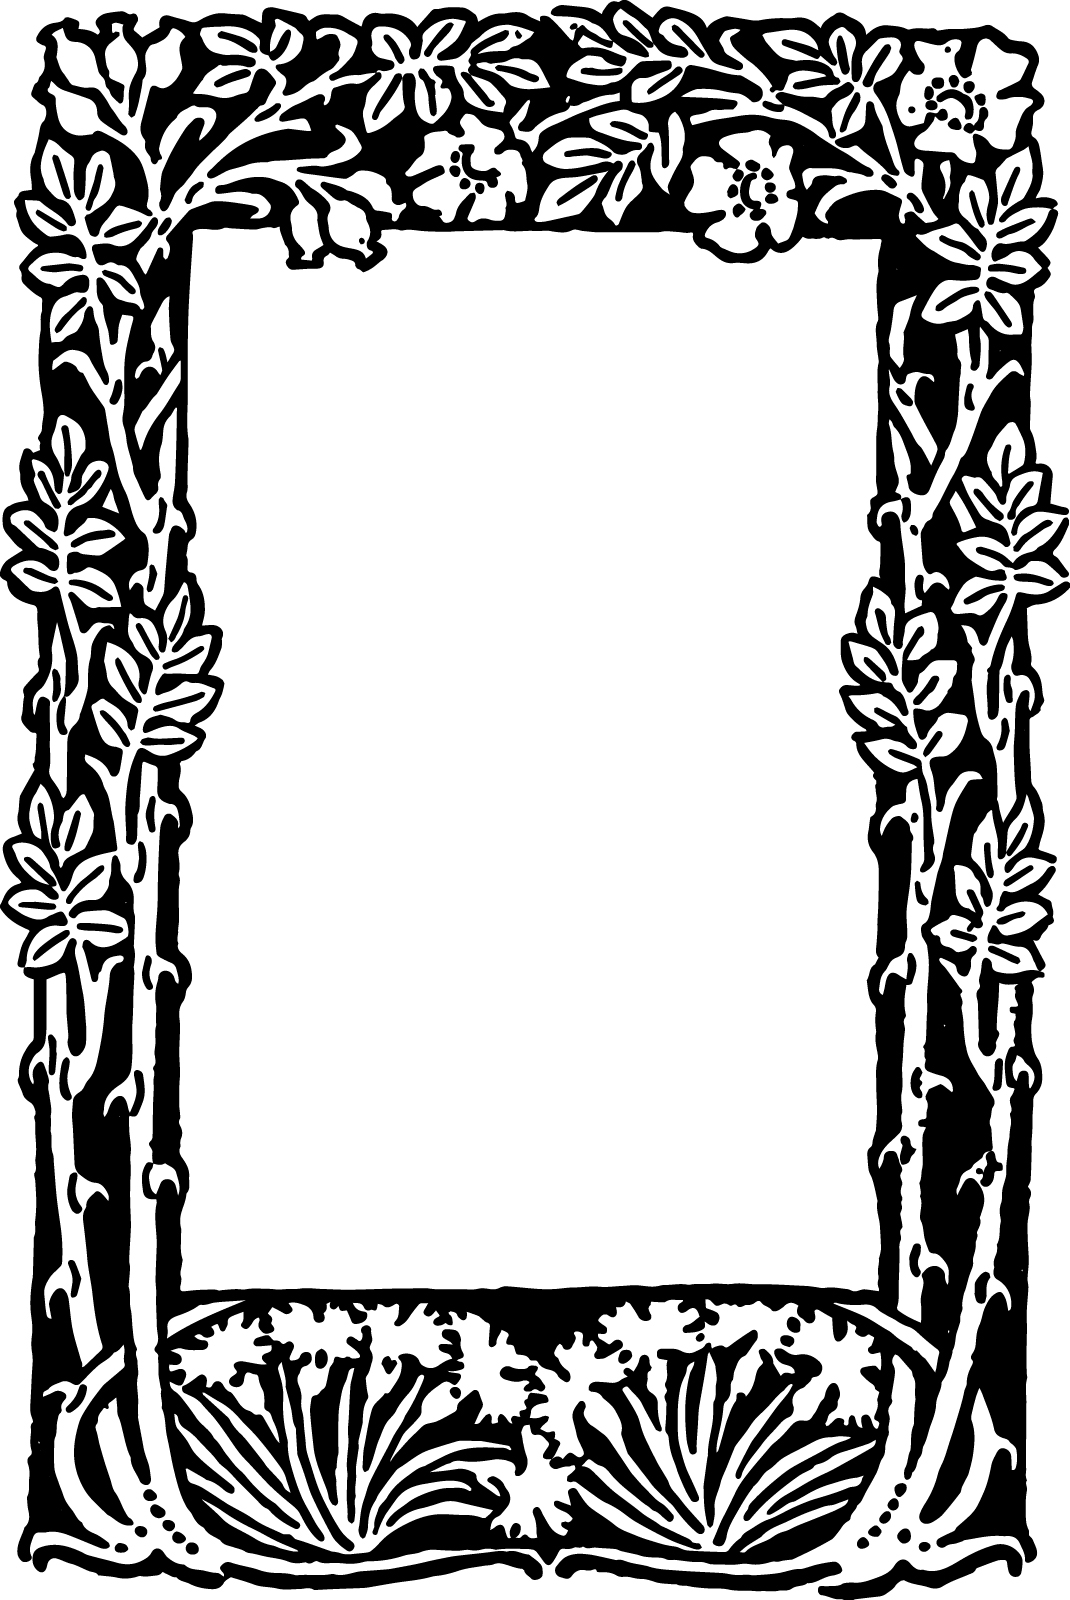 Free Vector Floral Border Frame - Free Printable Borders and Frames